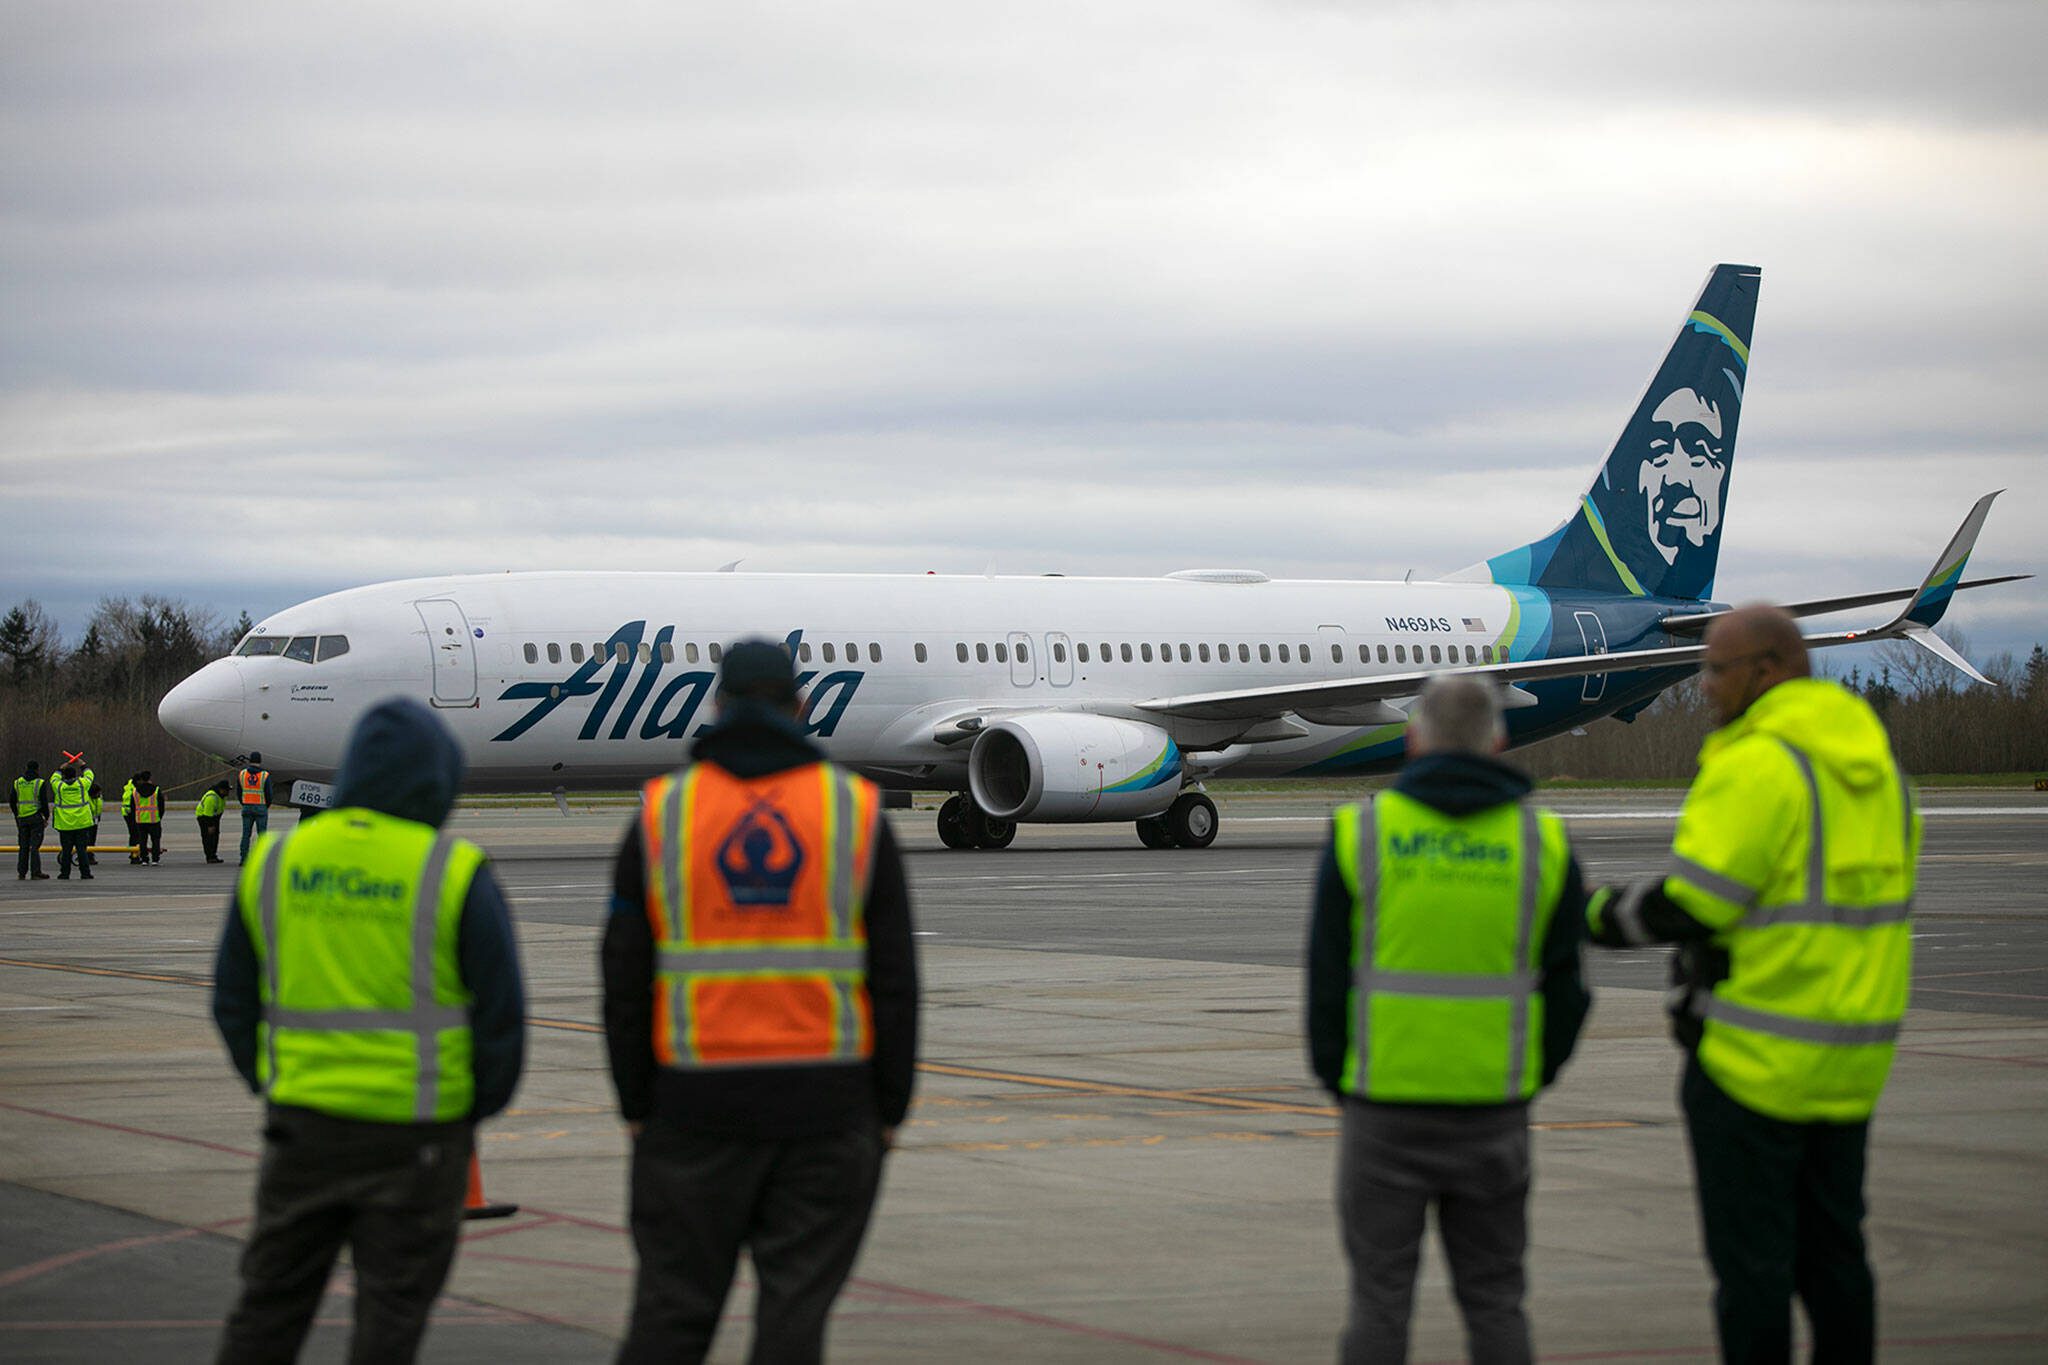 Airport workers watch as an Alaska Airlines Boeing 737 embarks on the first 737 flight out of Paine Field Airport Thursday, Feb. 17, 2022, in Everett, Washington. (Ryan Berry / The Herald)